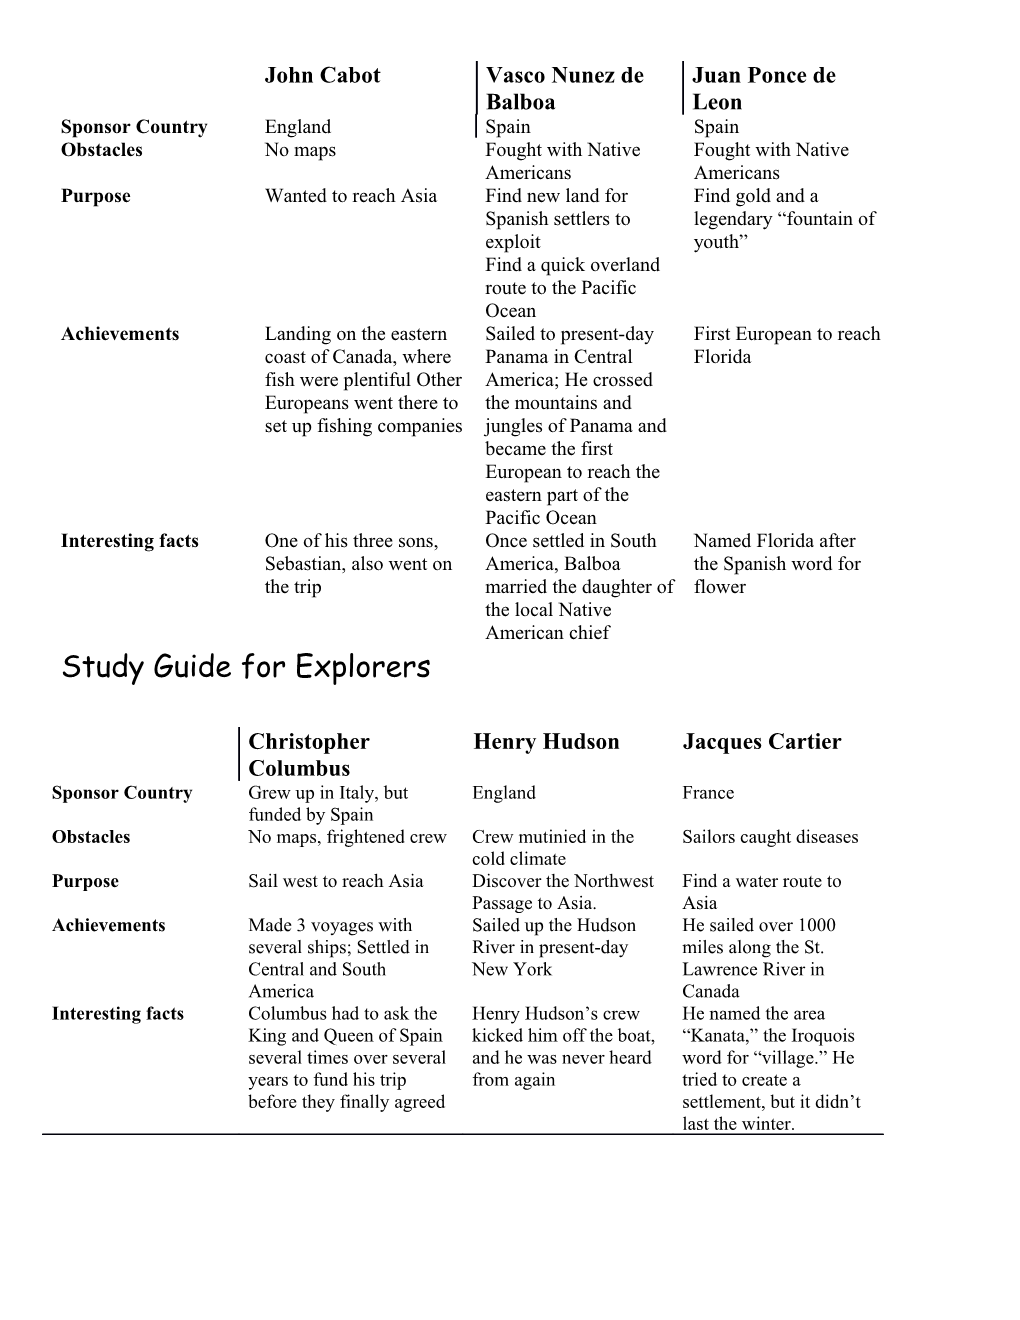 Study Guide for Explorers